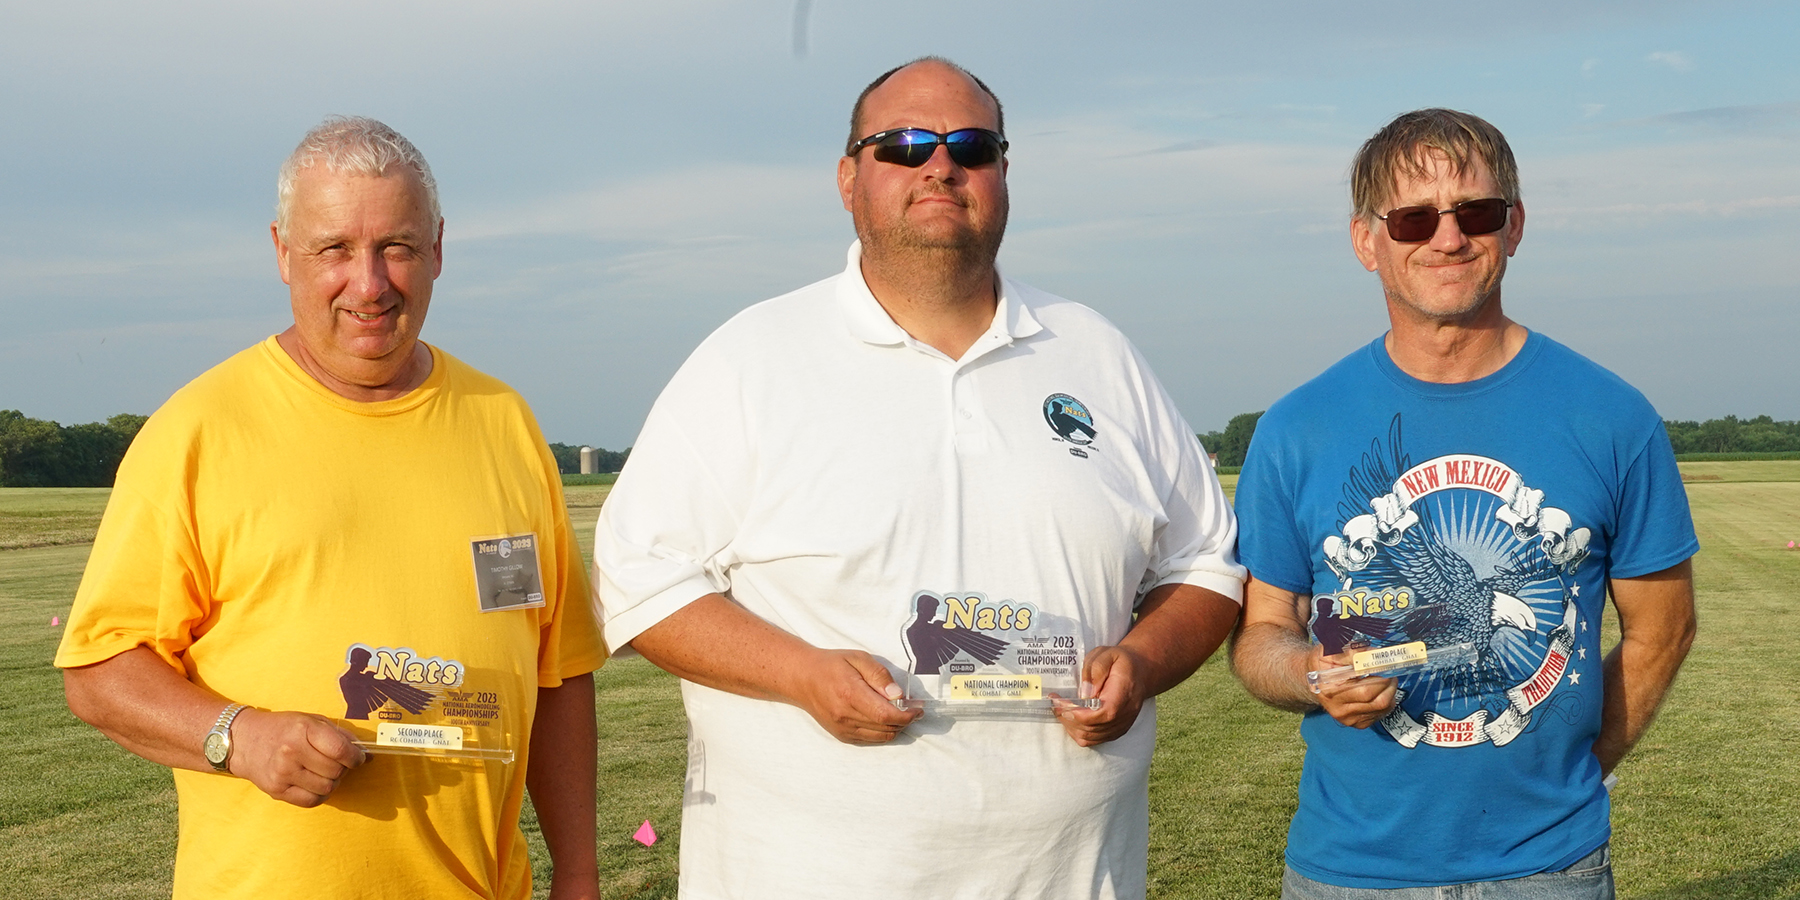 12.	GNAT awards. Tim Gillow (second), Will Drumm (first), and George Pritchett (third).